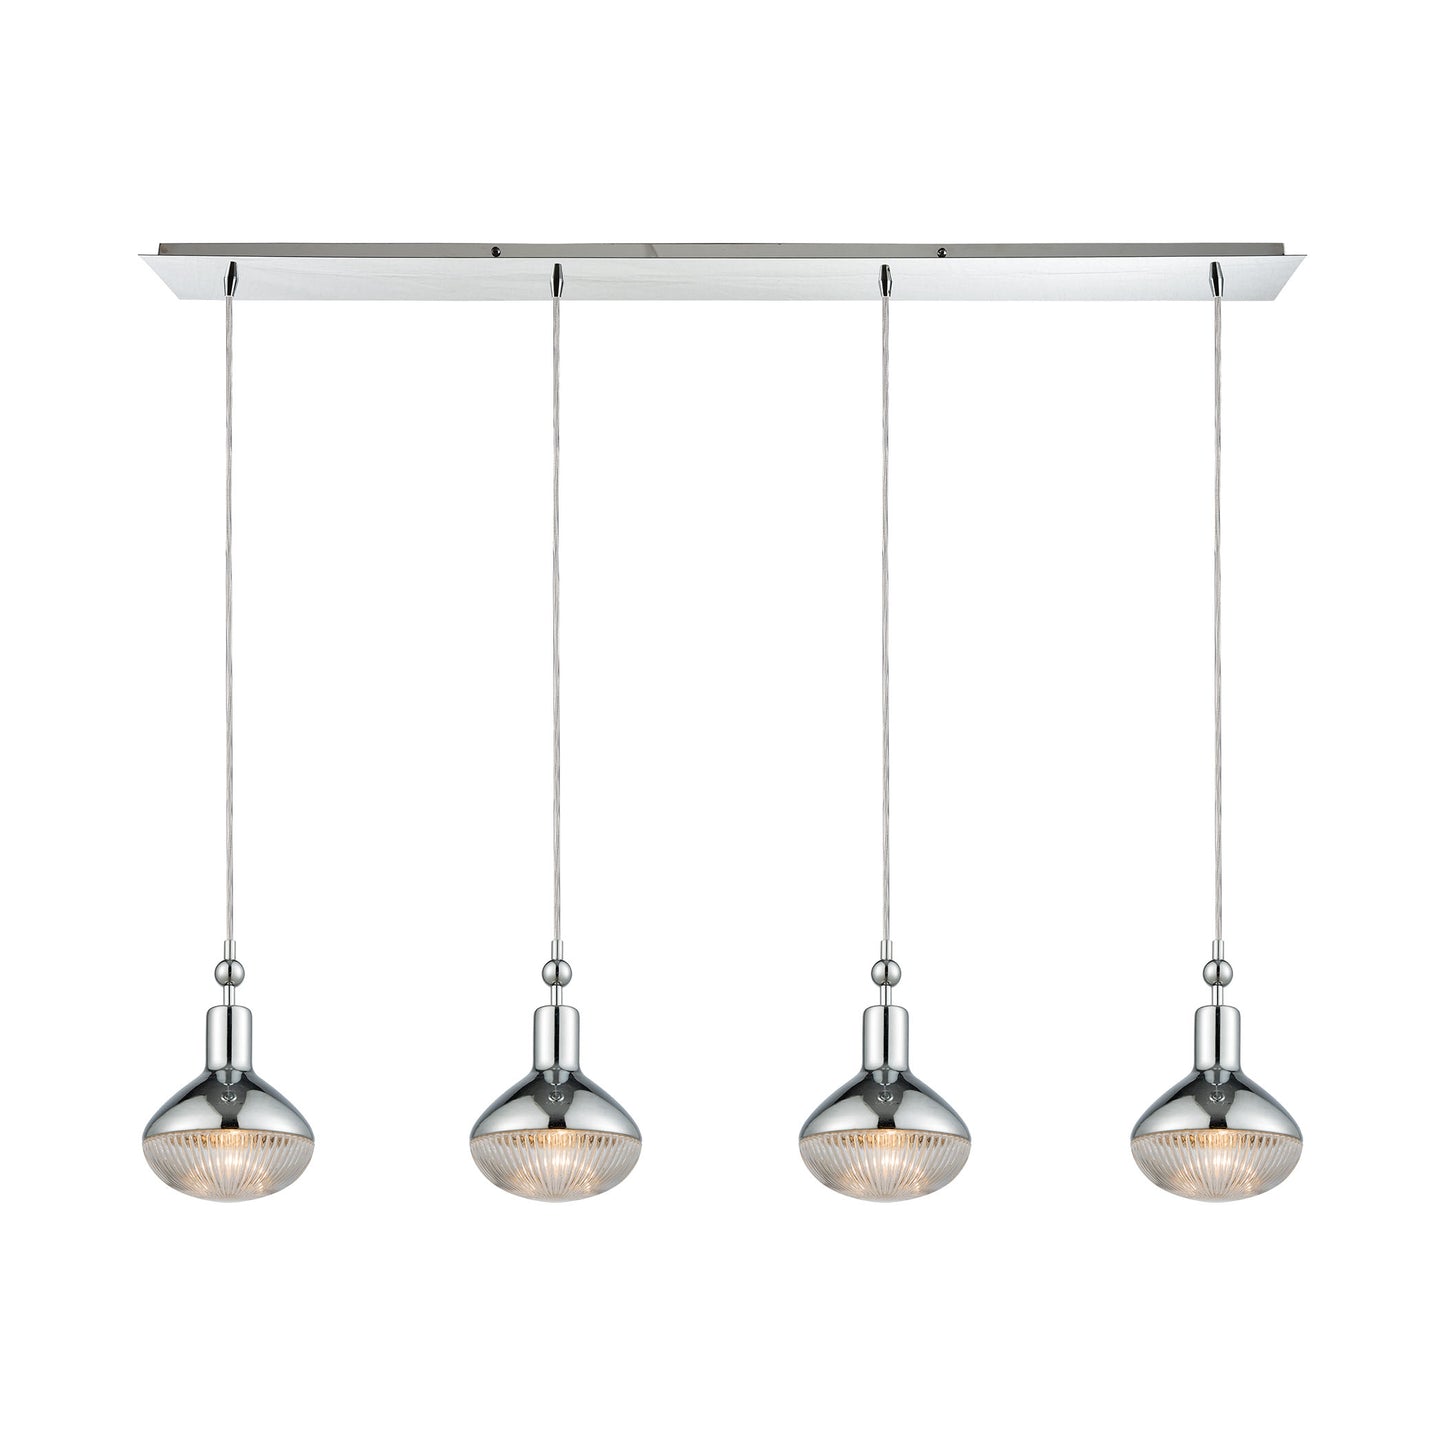 ELK Lighting 56623/4LP - Ravette 46" Wide 4-Light Linear Pendant Fixture in Polished Chrome with Cle